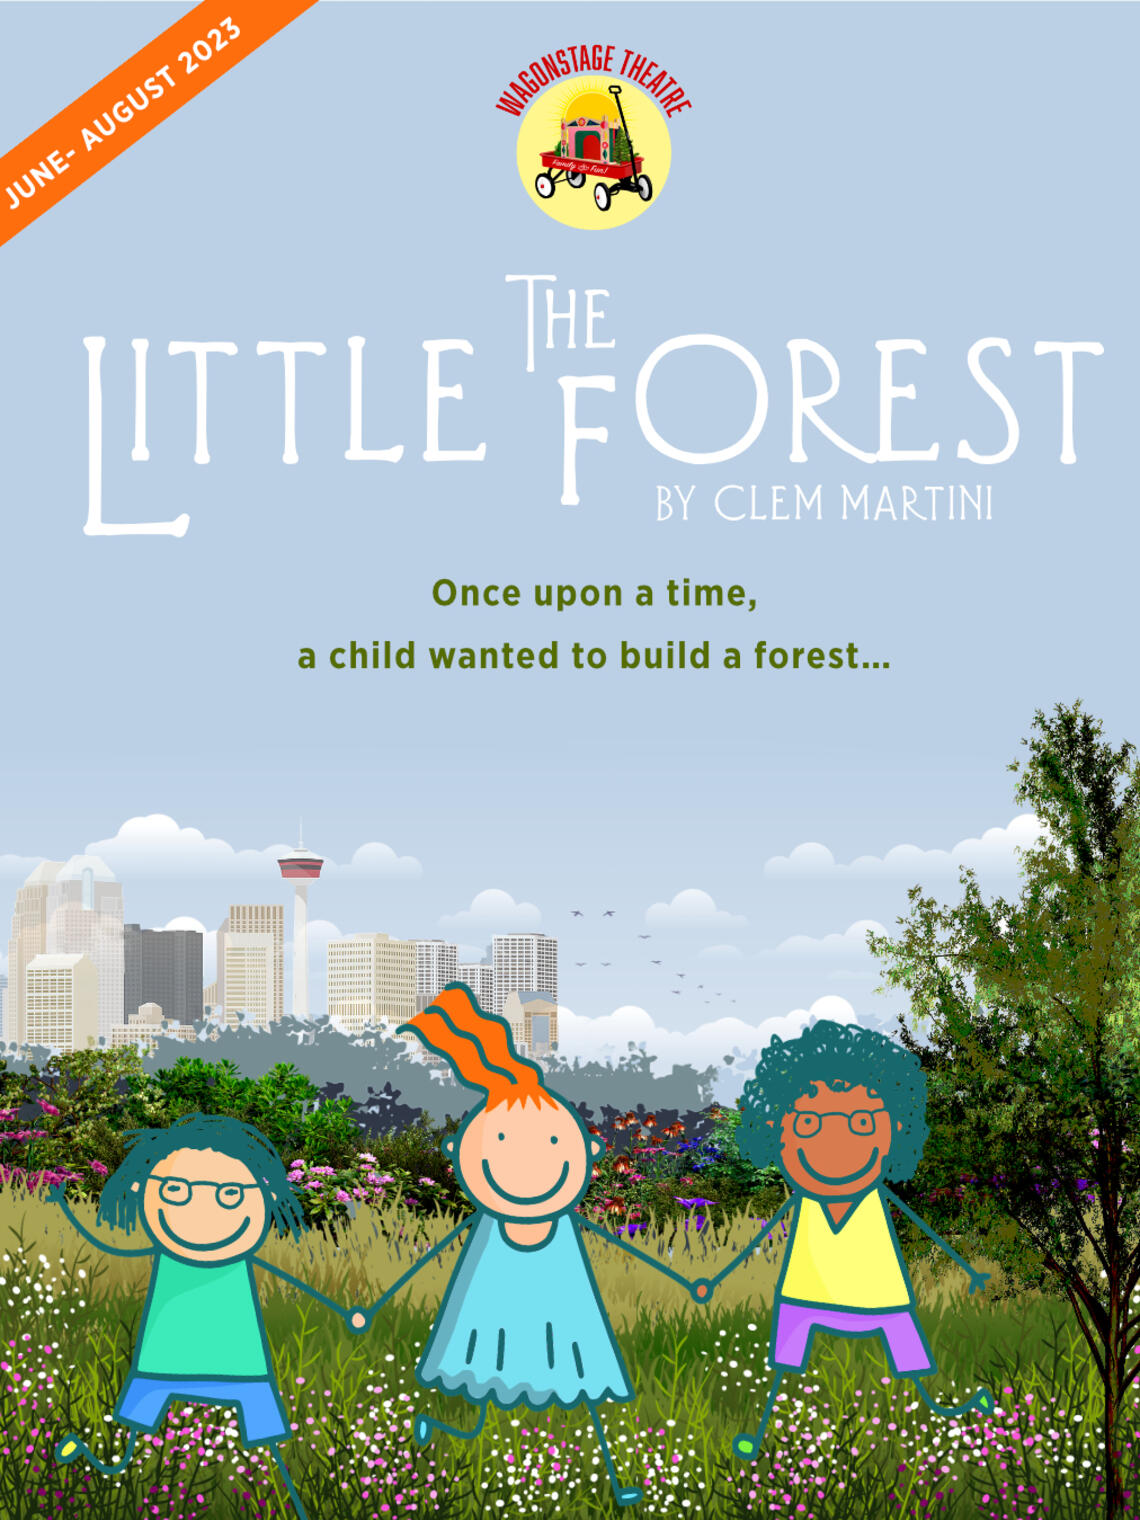 The Little Forest by Clem Martini